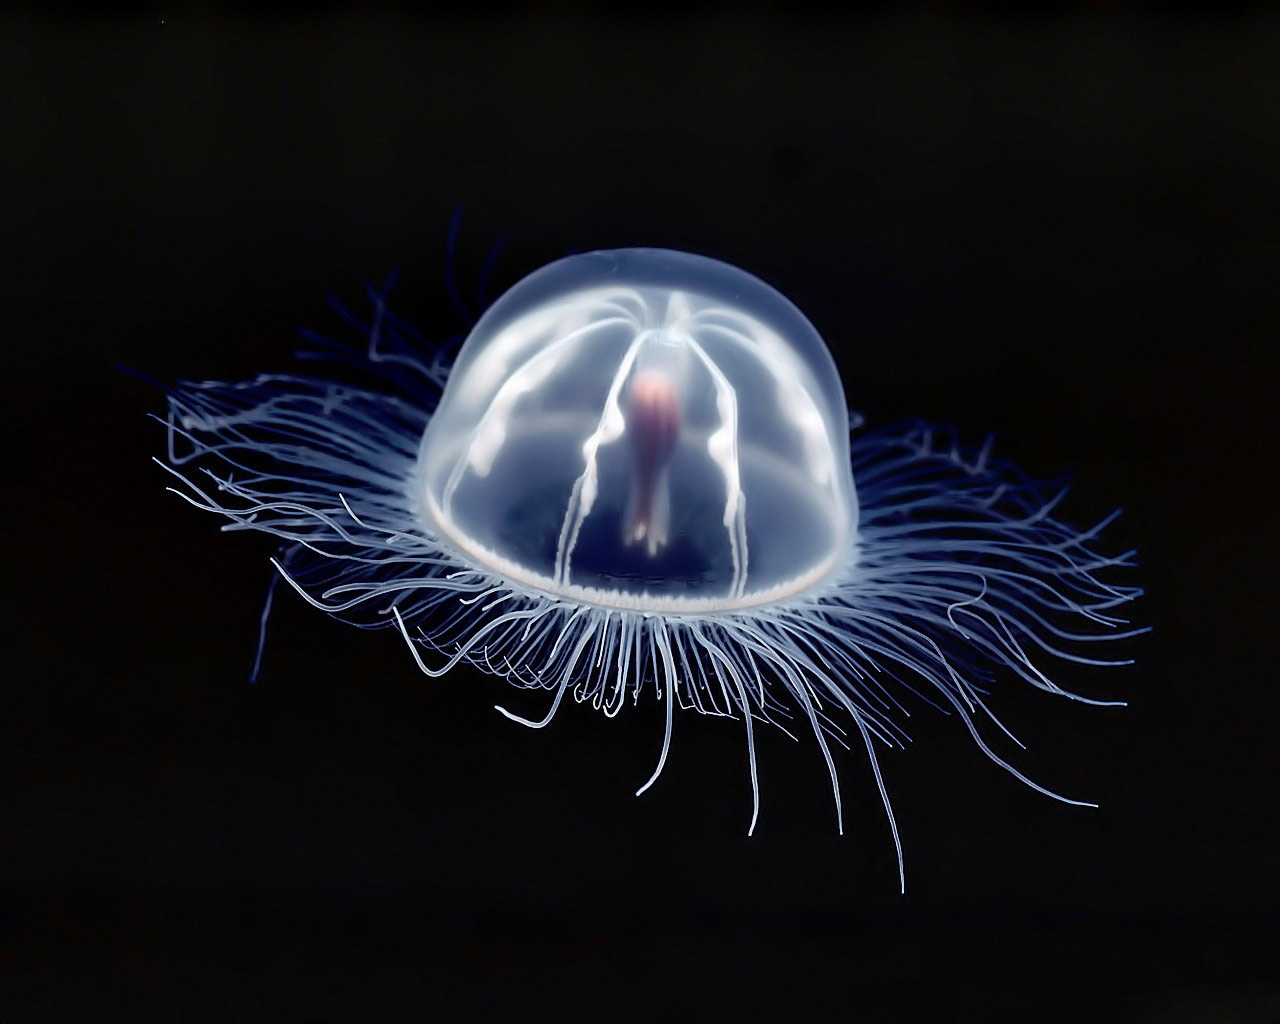 Jellyfish Wallpapers Fun Animals Wiki Videos Pictures HD Wallpapers Download Free Images Wallpaper [wallpaper981.blogspot.com]